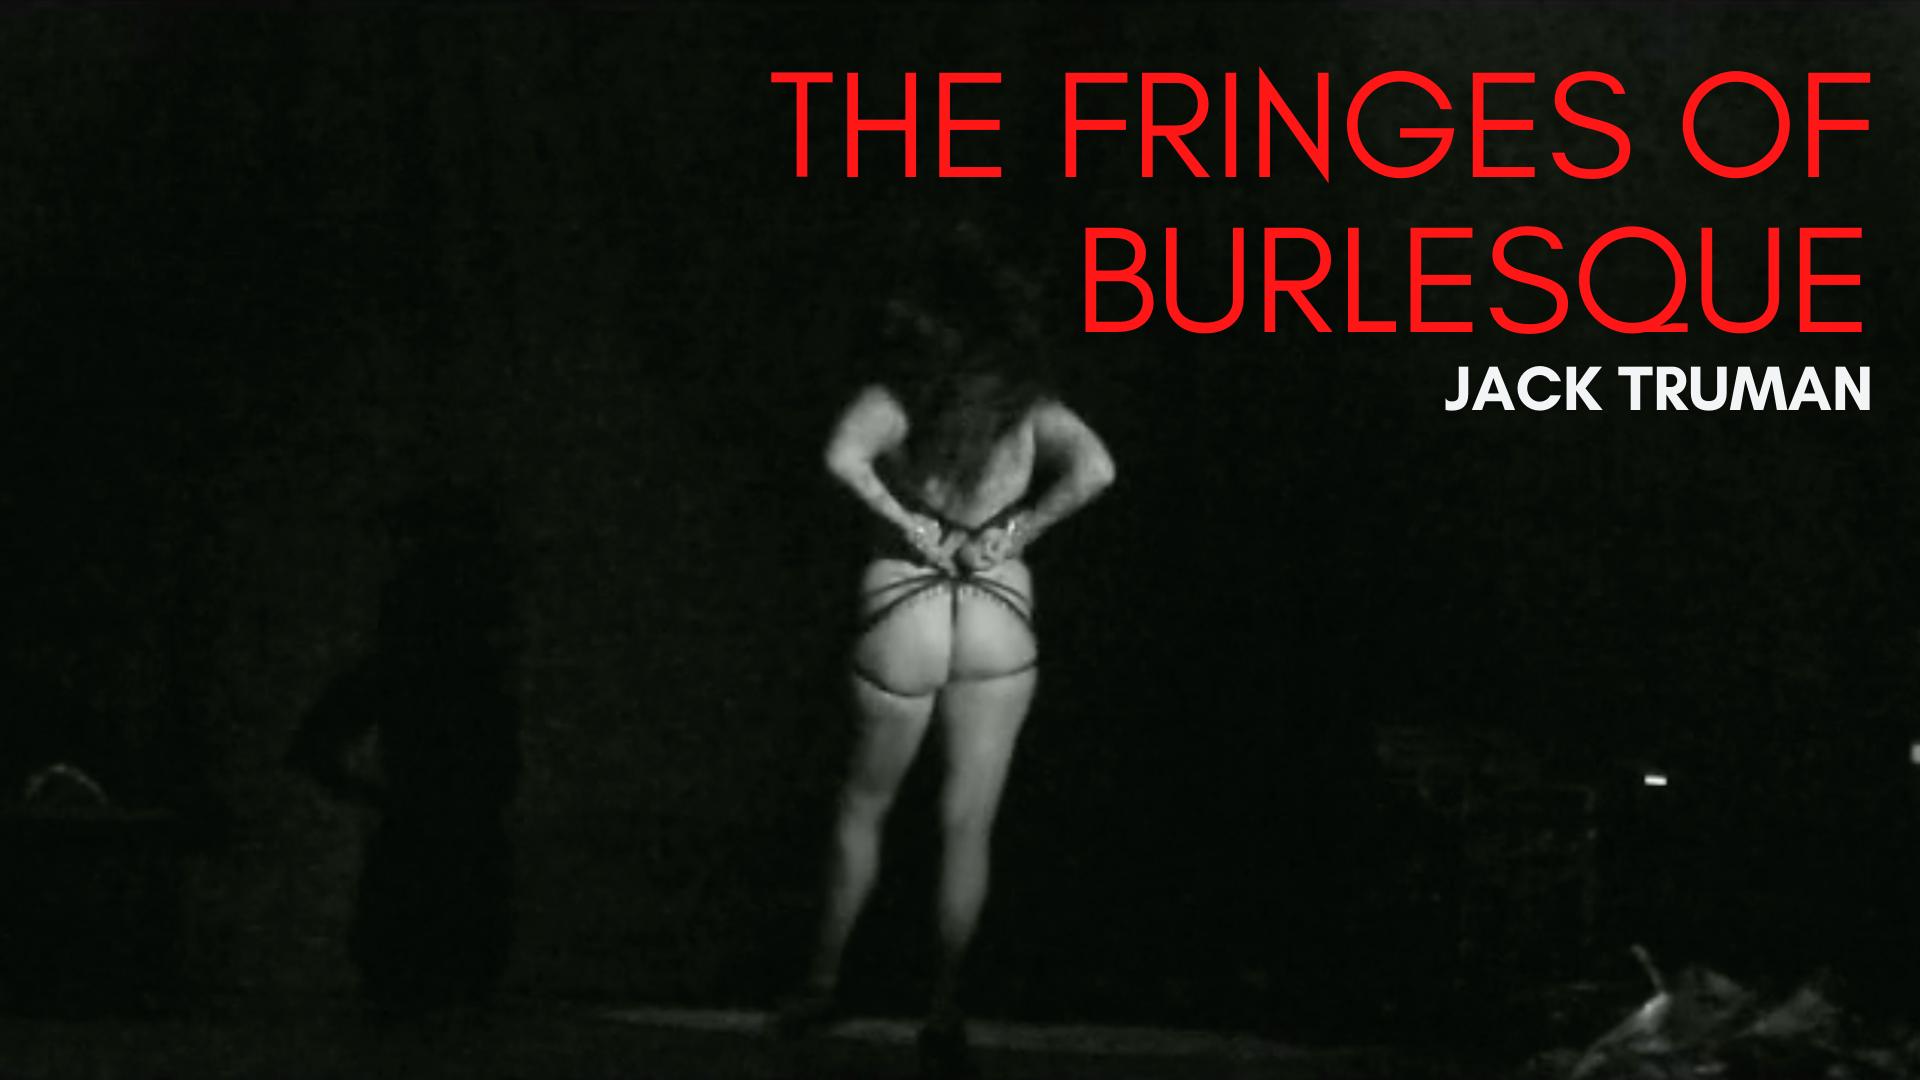 The Fringes of Burlesque